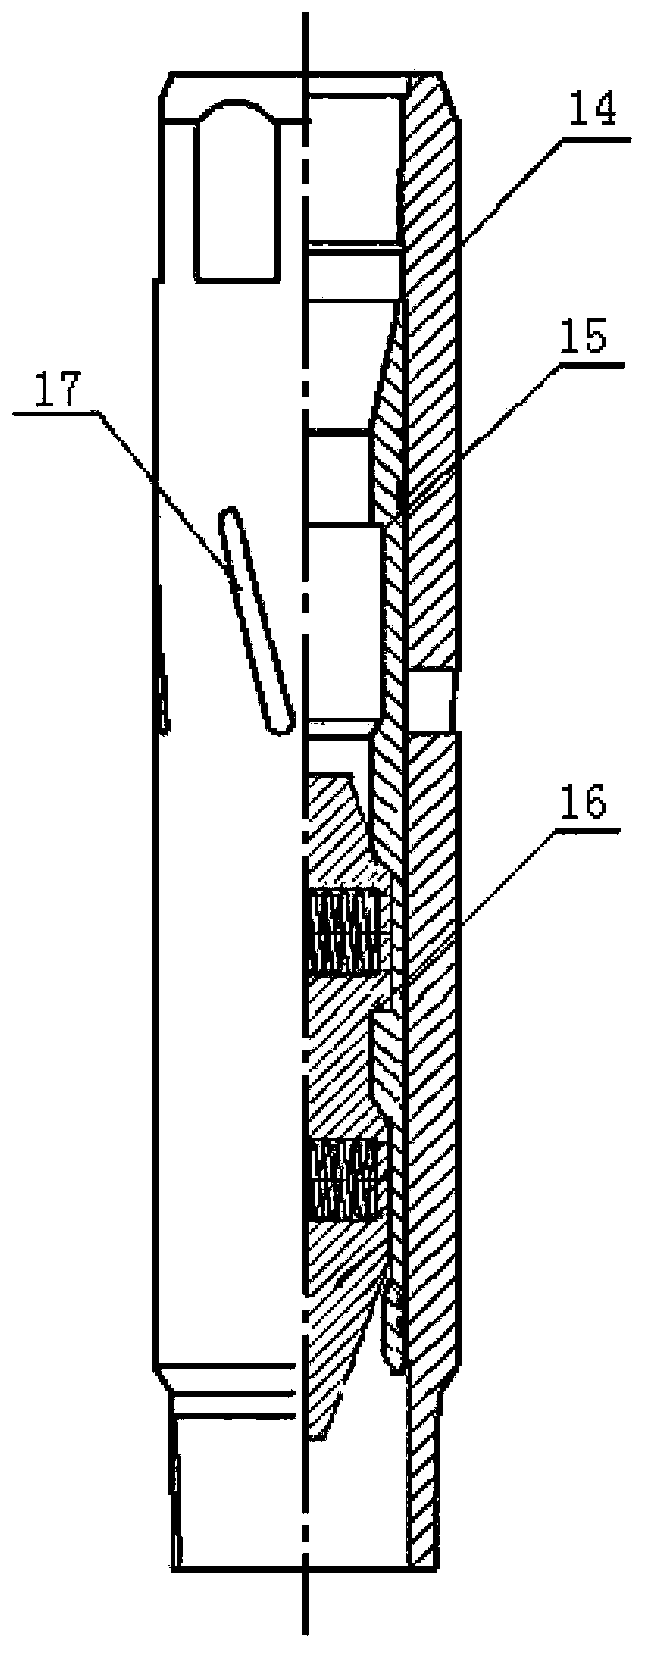 Hydraulic-type fracturing sliding sleeve opening and closing tool